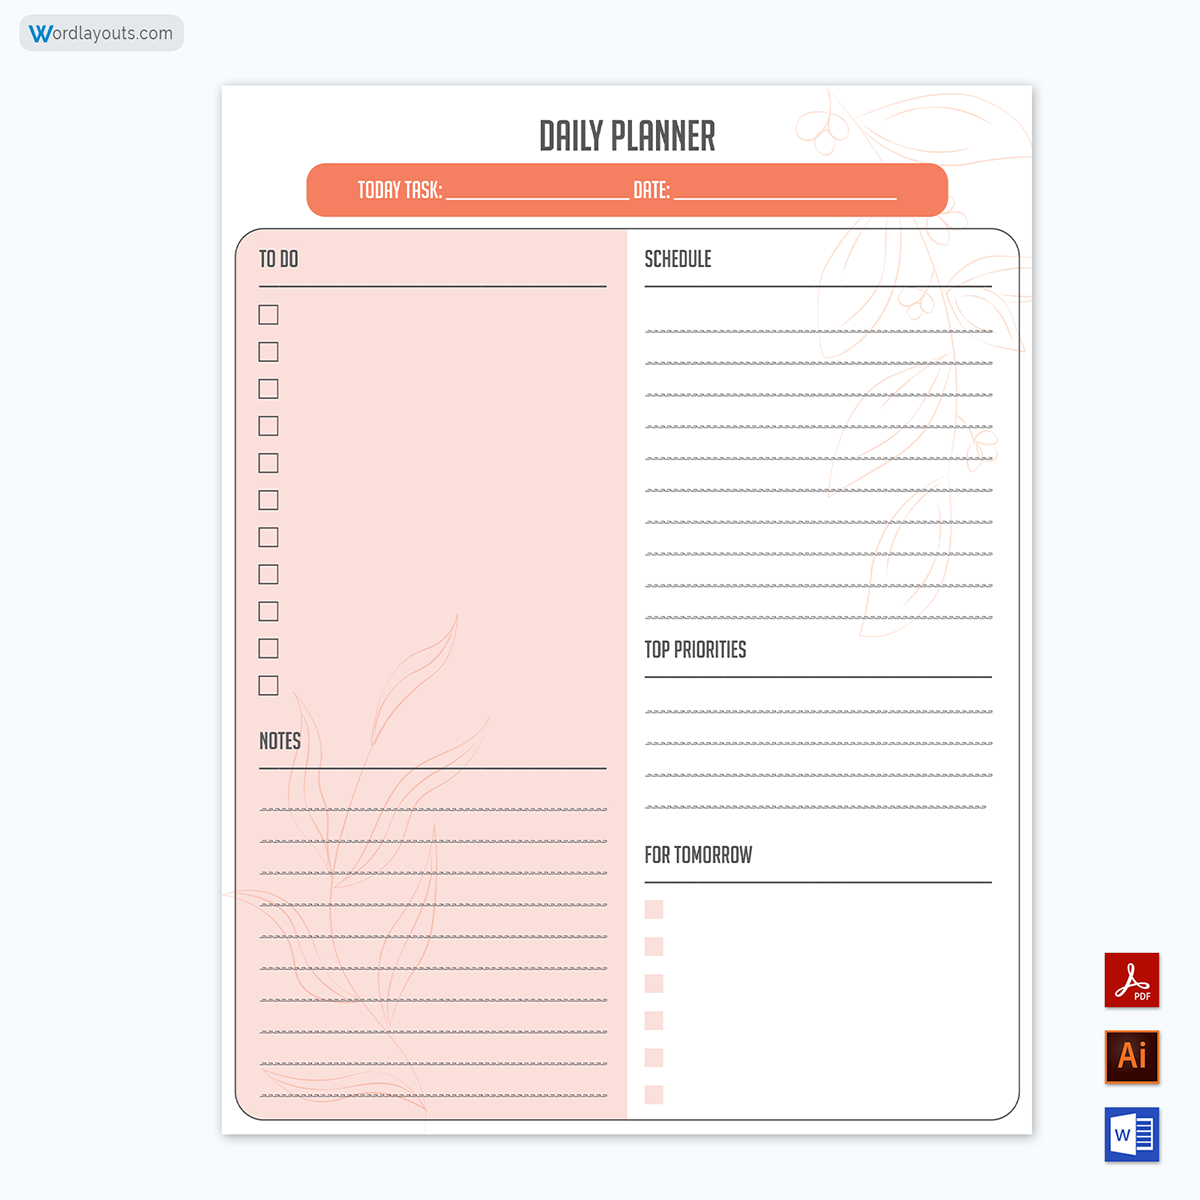 Daily-Planner-Template-8669ndnjp-06-23-p07